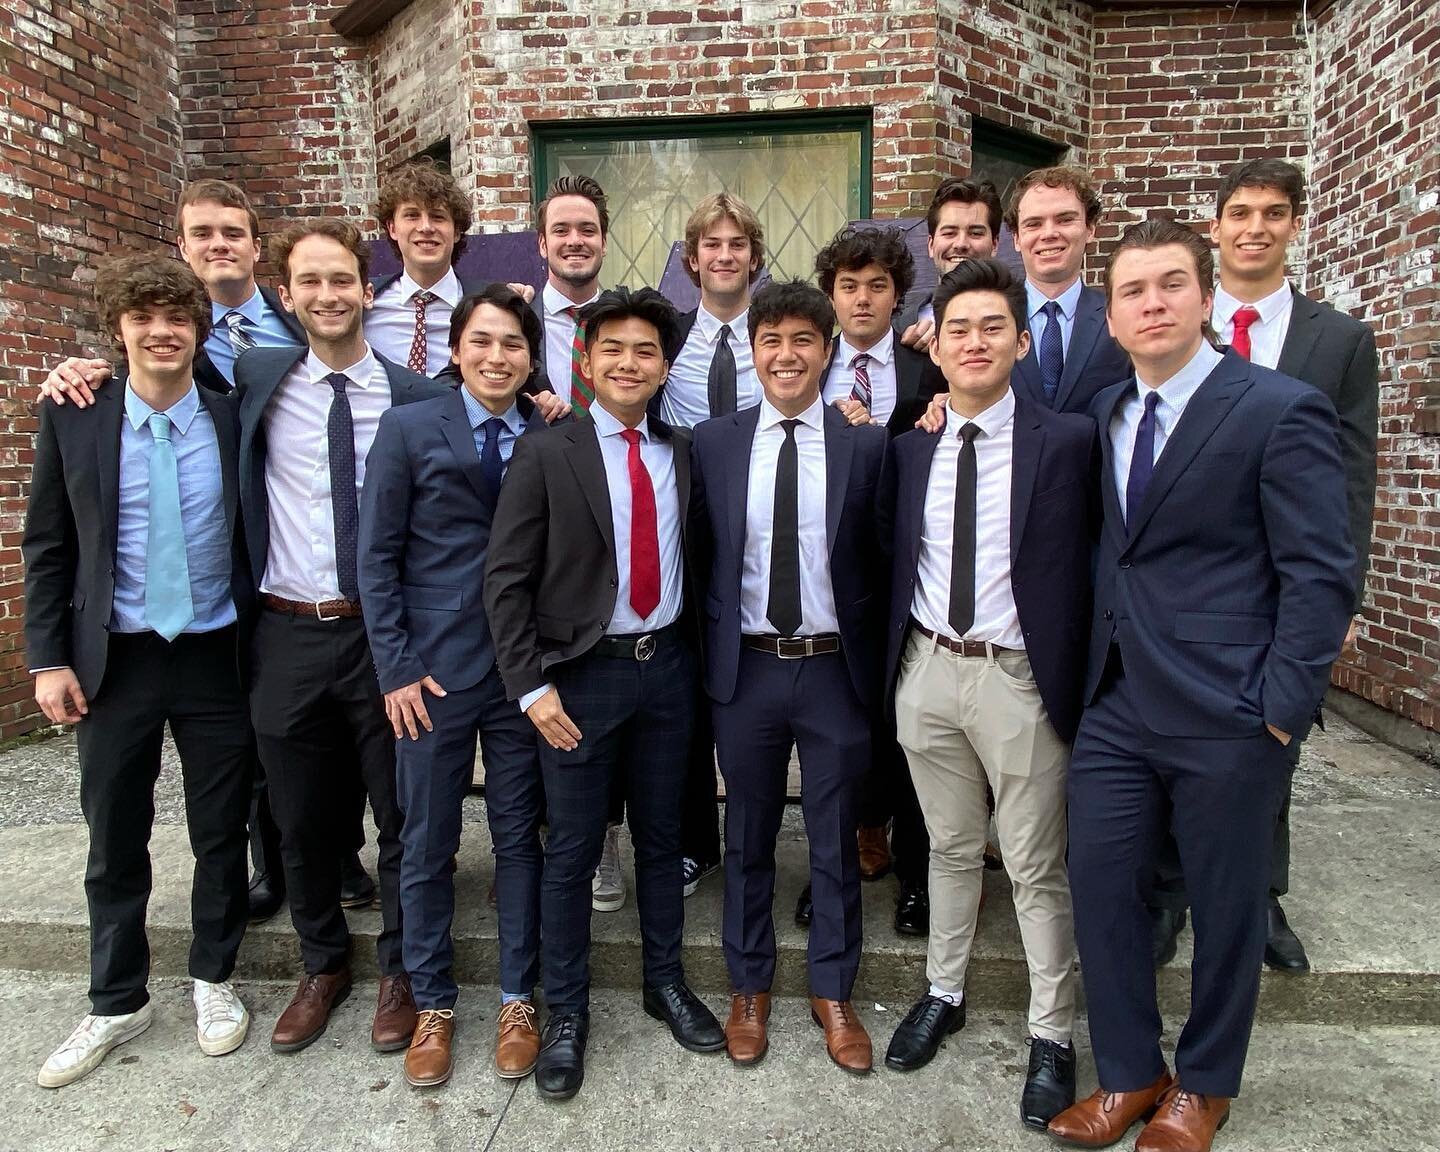 The brothers of Phi Kappa Psi celebrated Founder&rsquo;s Day last weekend, a day dedicated to meeting the beloved alumni that made our house special. Congrats to all the boys who were awarded scholarships! Shoutout to @andrew_wolf18 for winning a sig